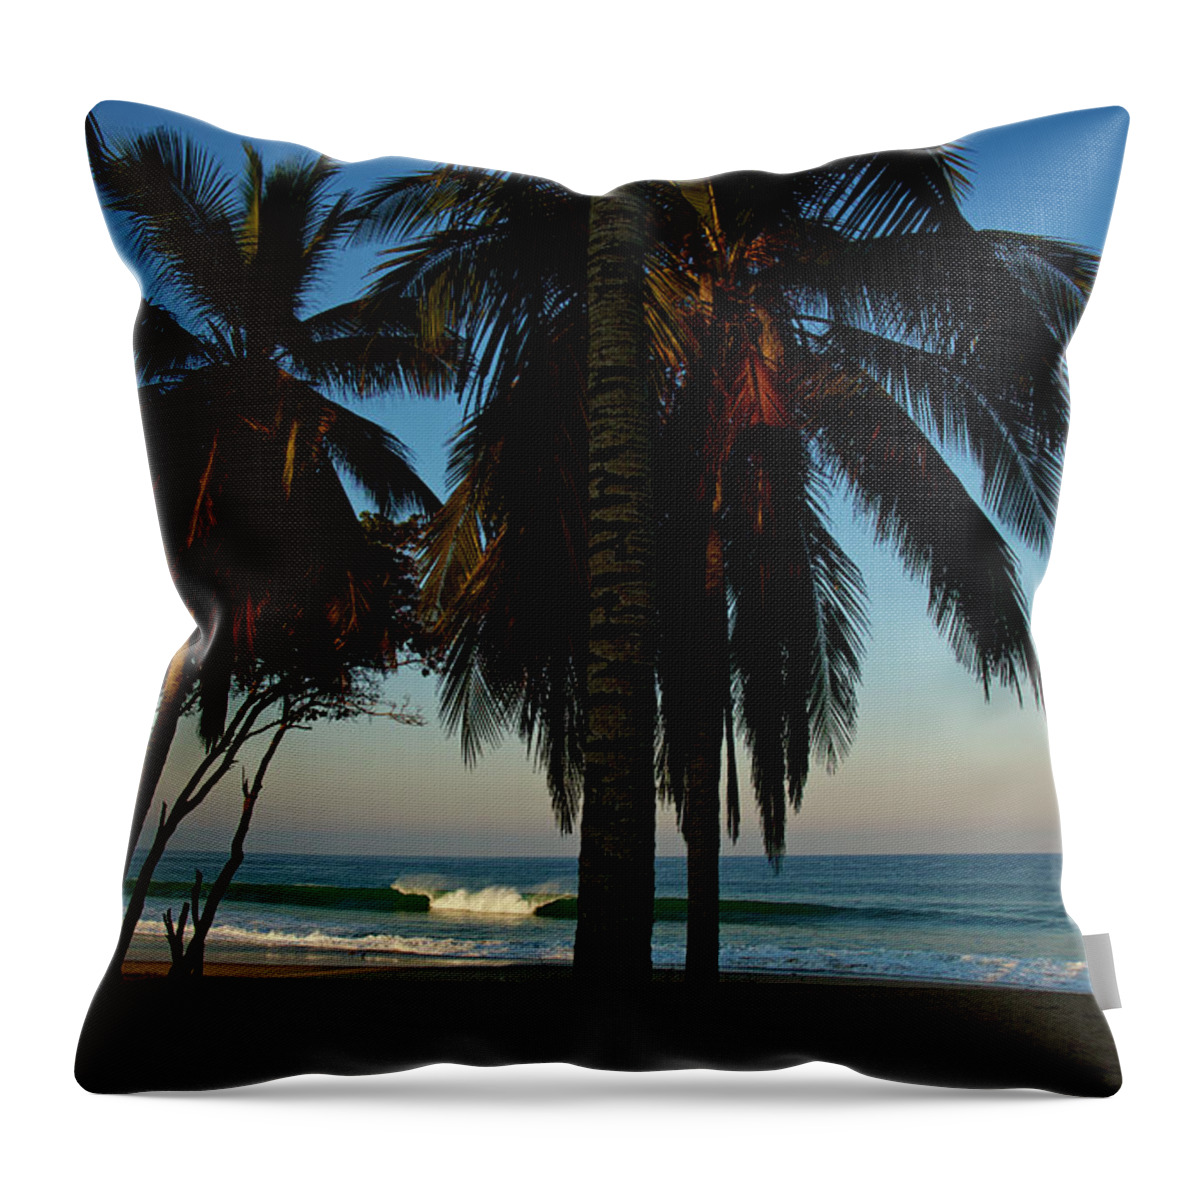 Surfing Throw Pillow featuring the photograph Paraiso by Nik West